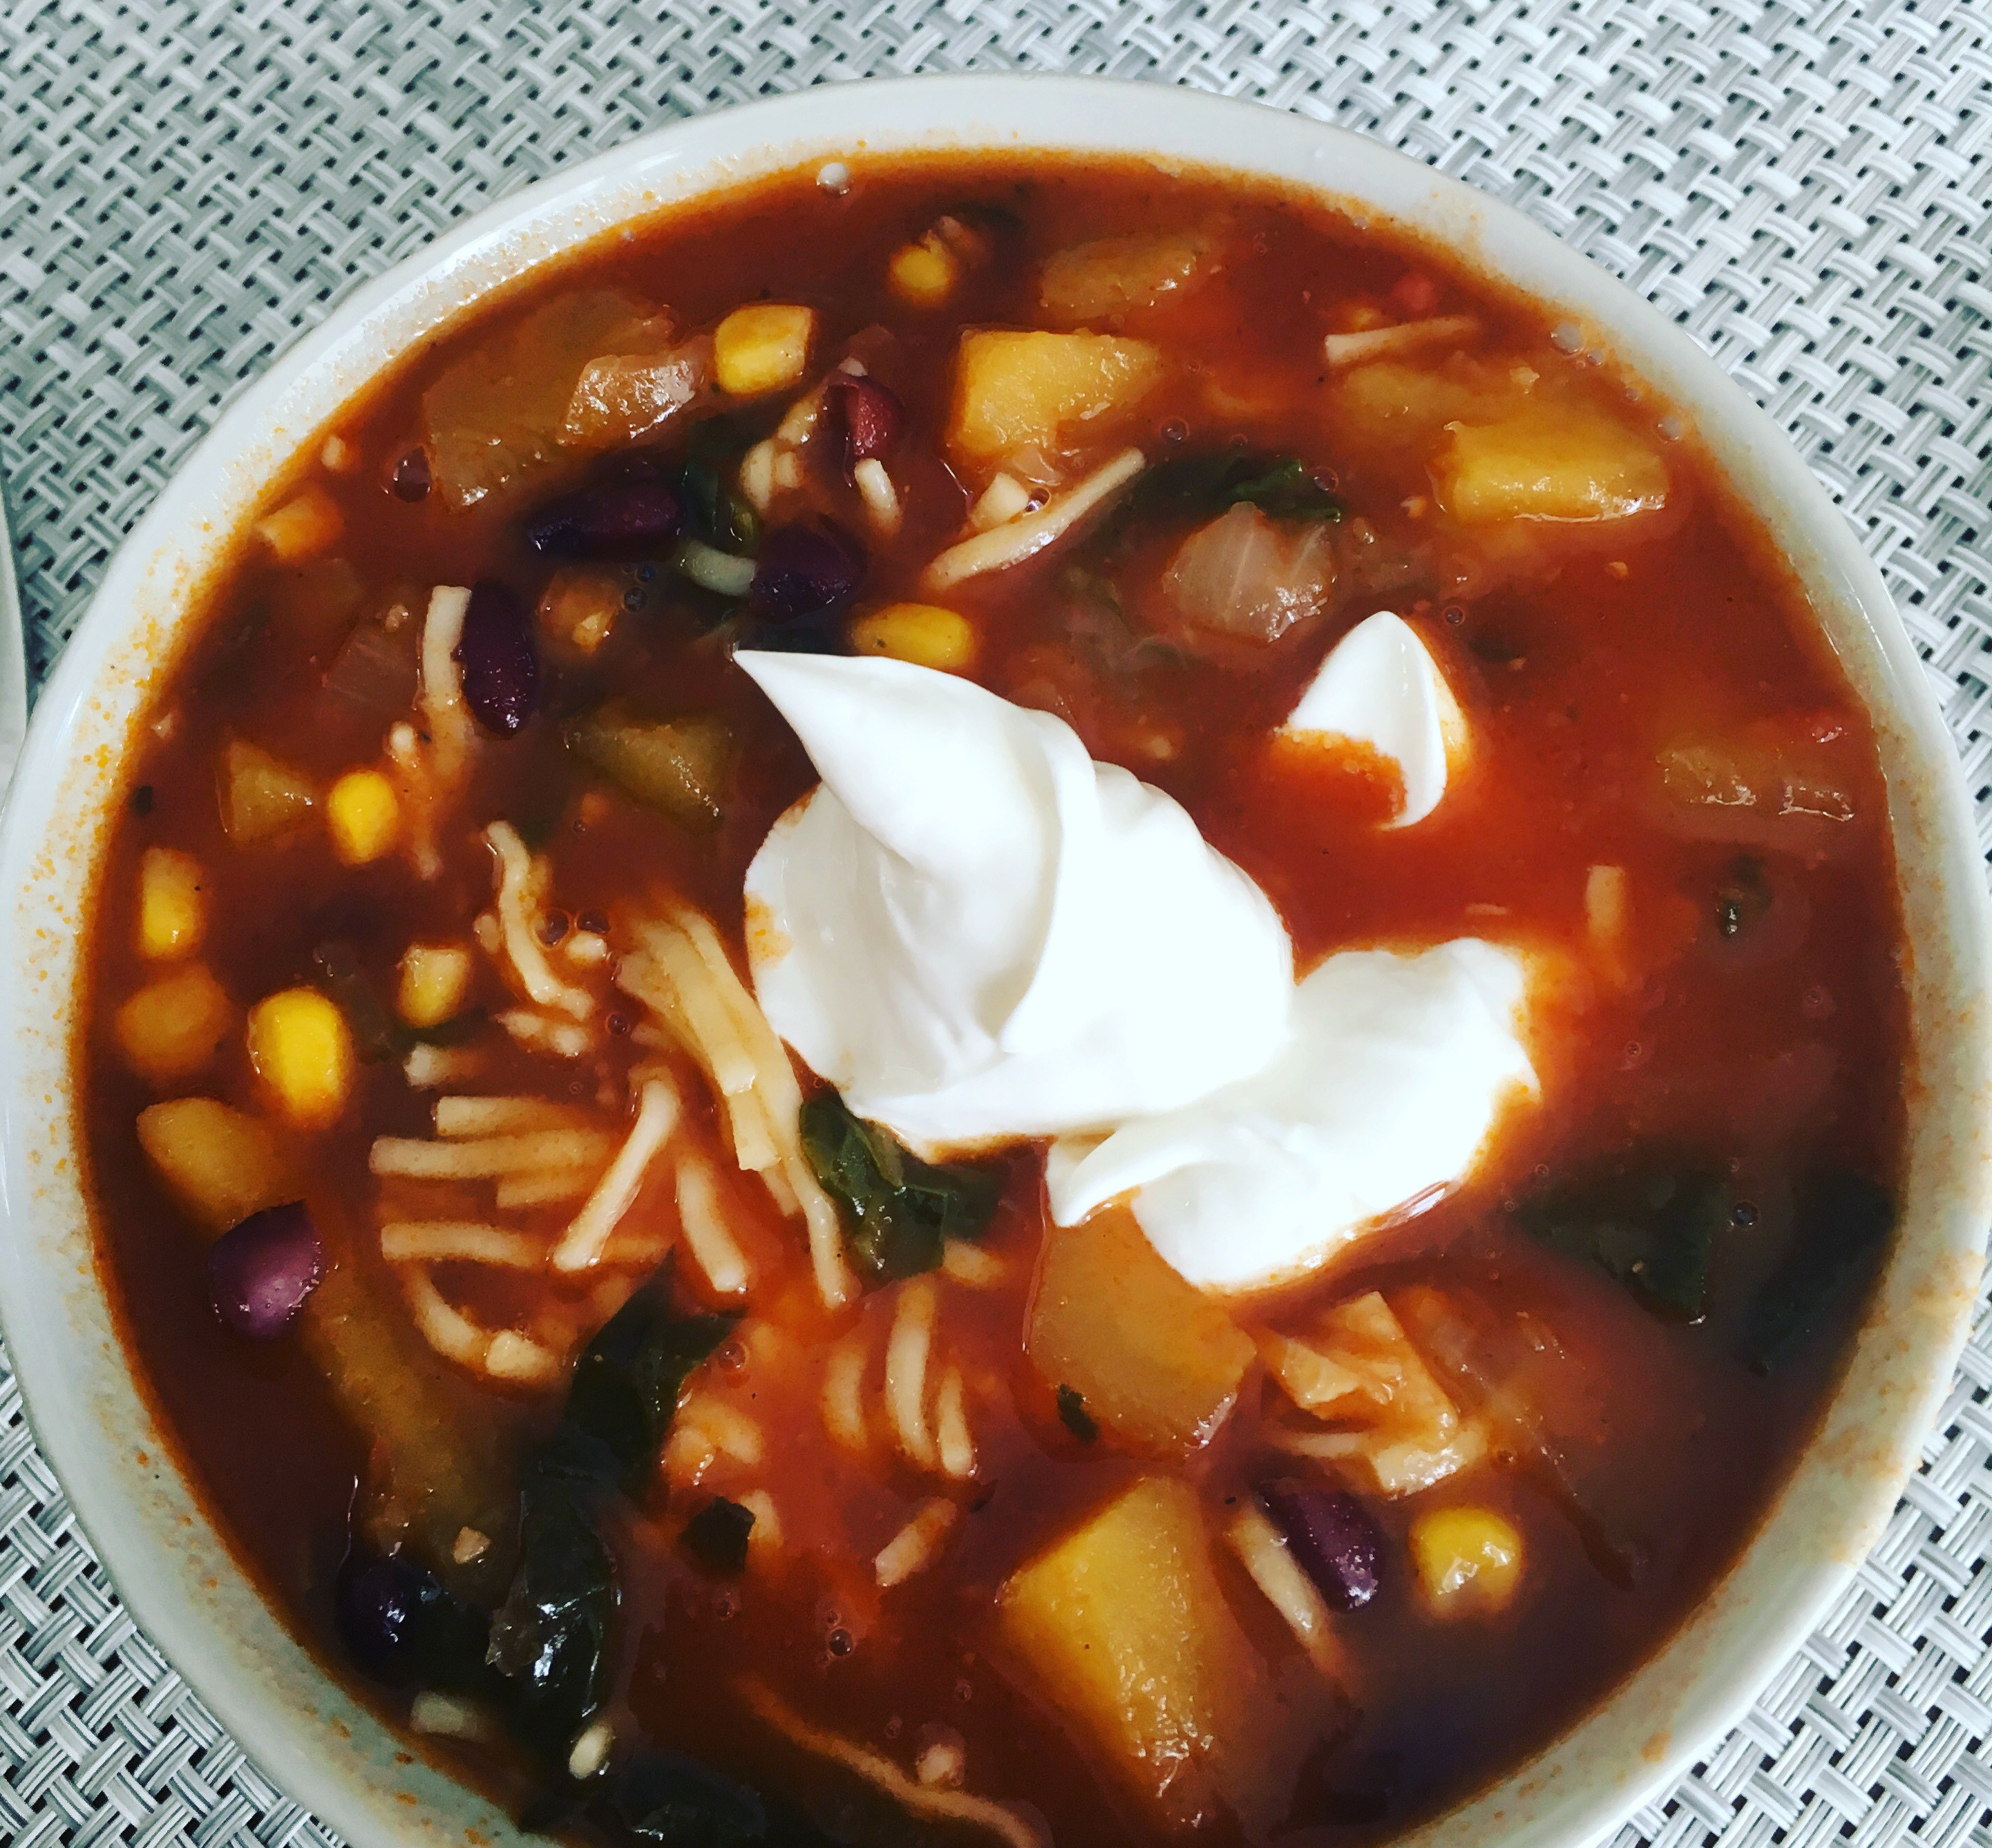 Soup with squash, beans, and noodles garnished with sour cream in a bowl